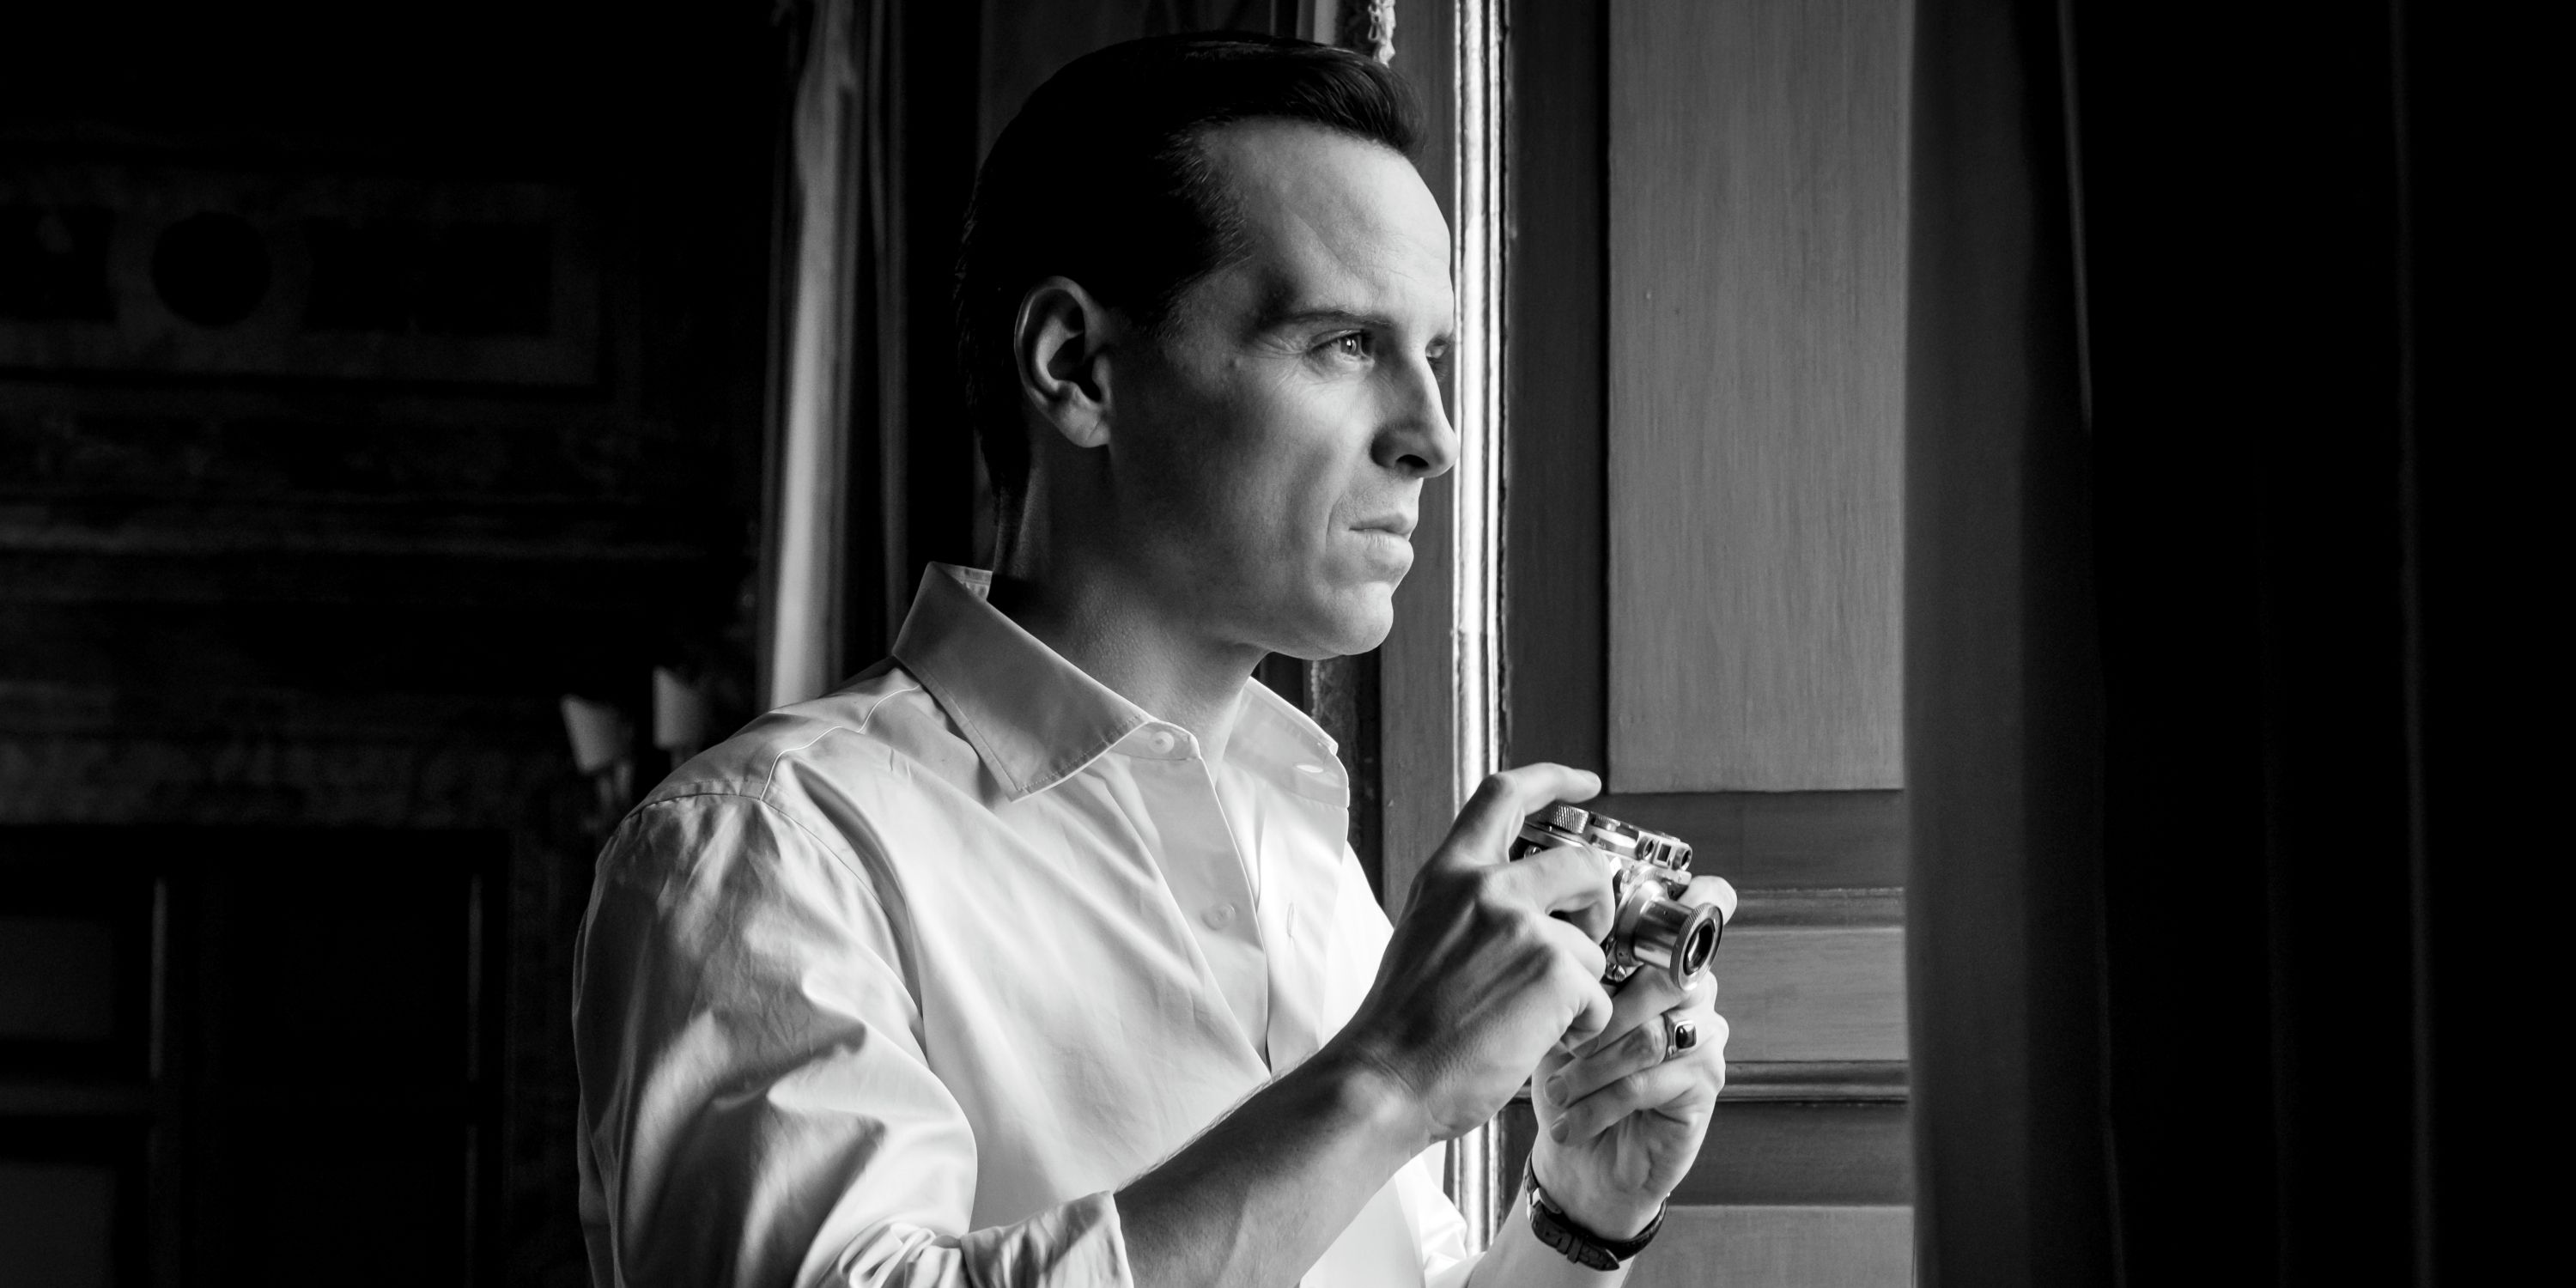 Andrew Scott as Tom Ripley looking out the window in Episode 4 of Netflix's Ripley